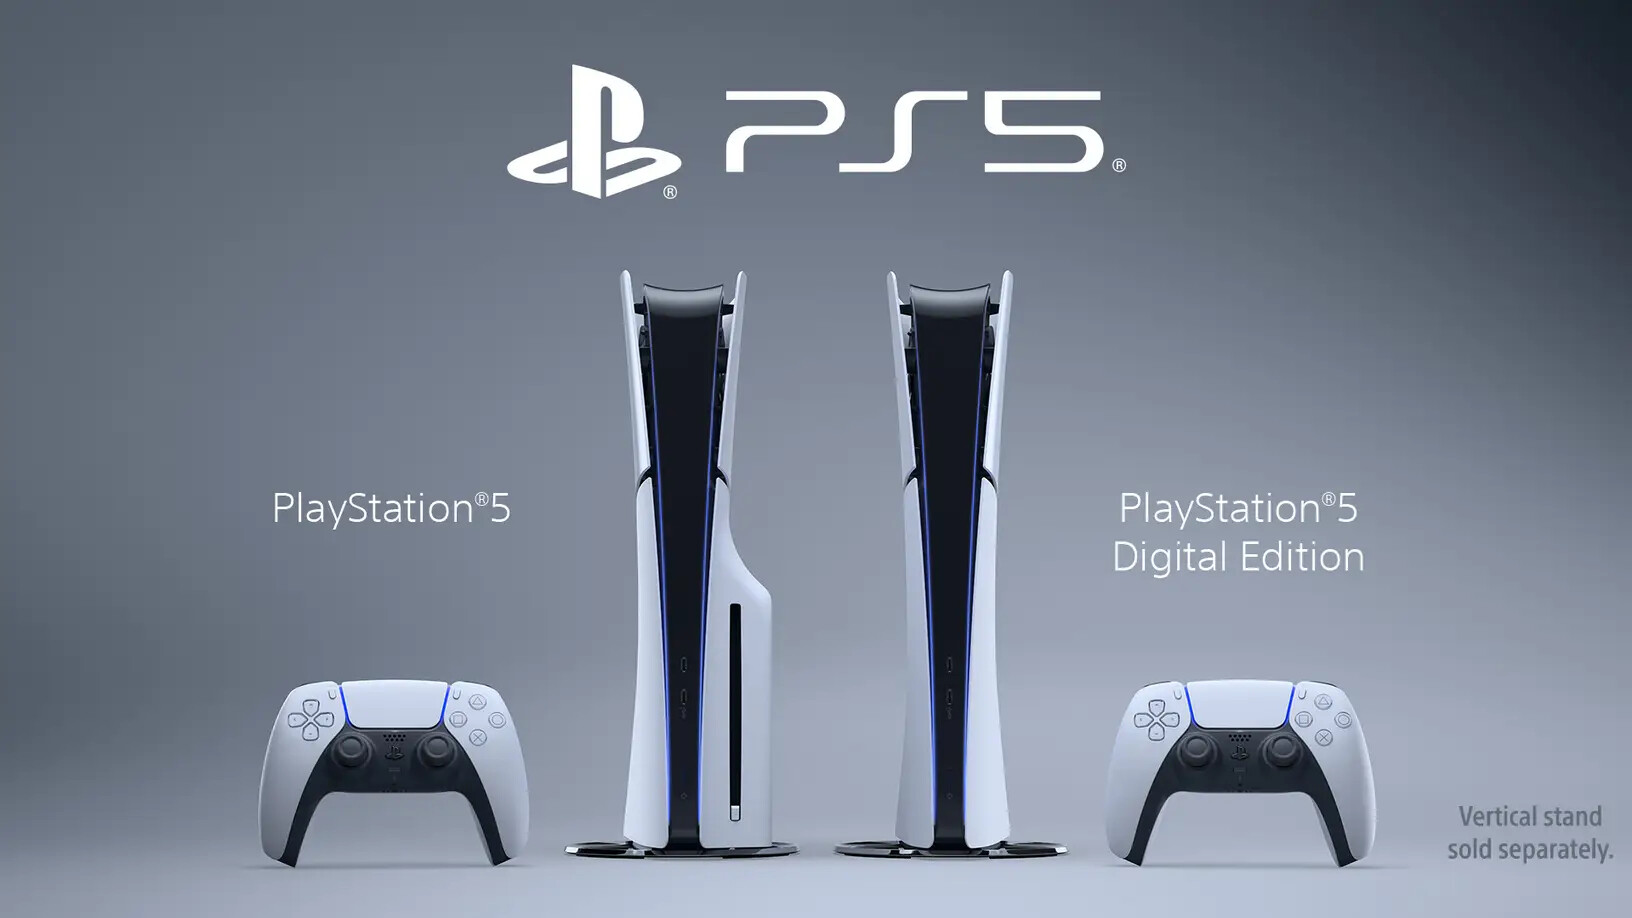 Sony Announces Refreshed, Slimmer PlayStation Consoles for the Holiday  Season, Increases Pricing of the PS5 Digital